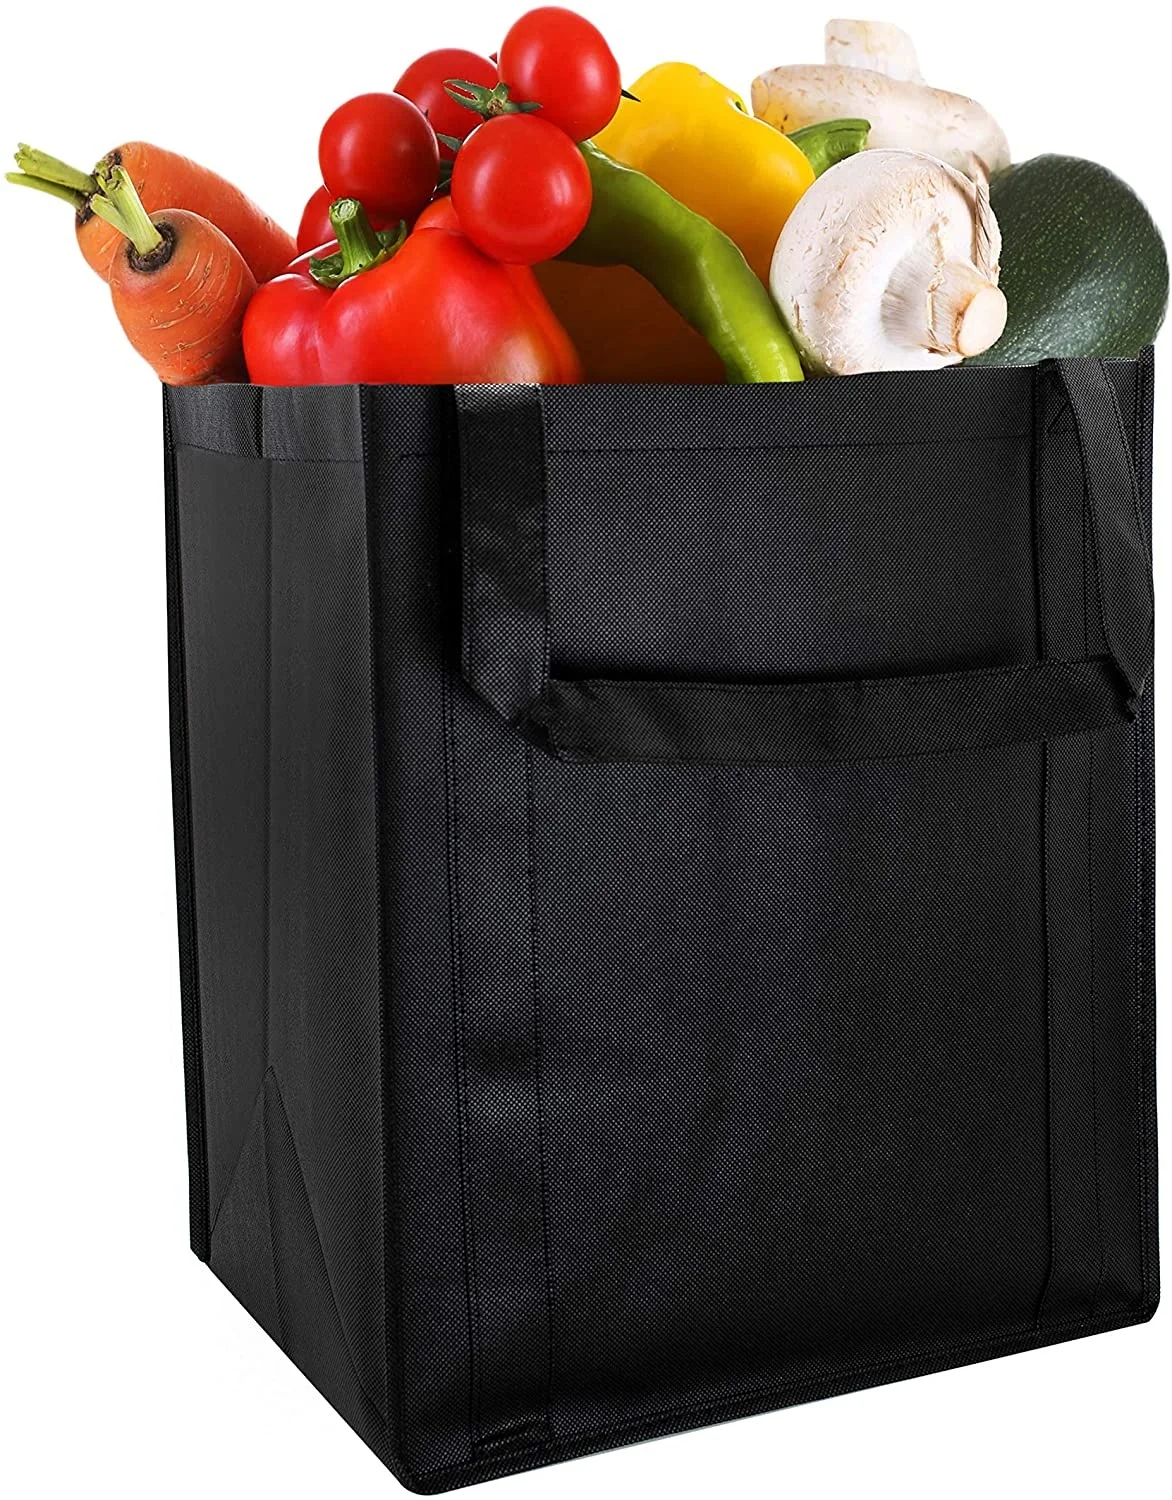 
eco friendly Customs Recycled Shopping pp non woven fabric grocery bag With Printing Logo tote bag 